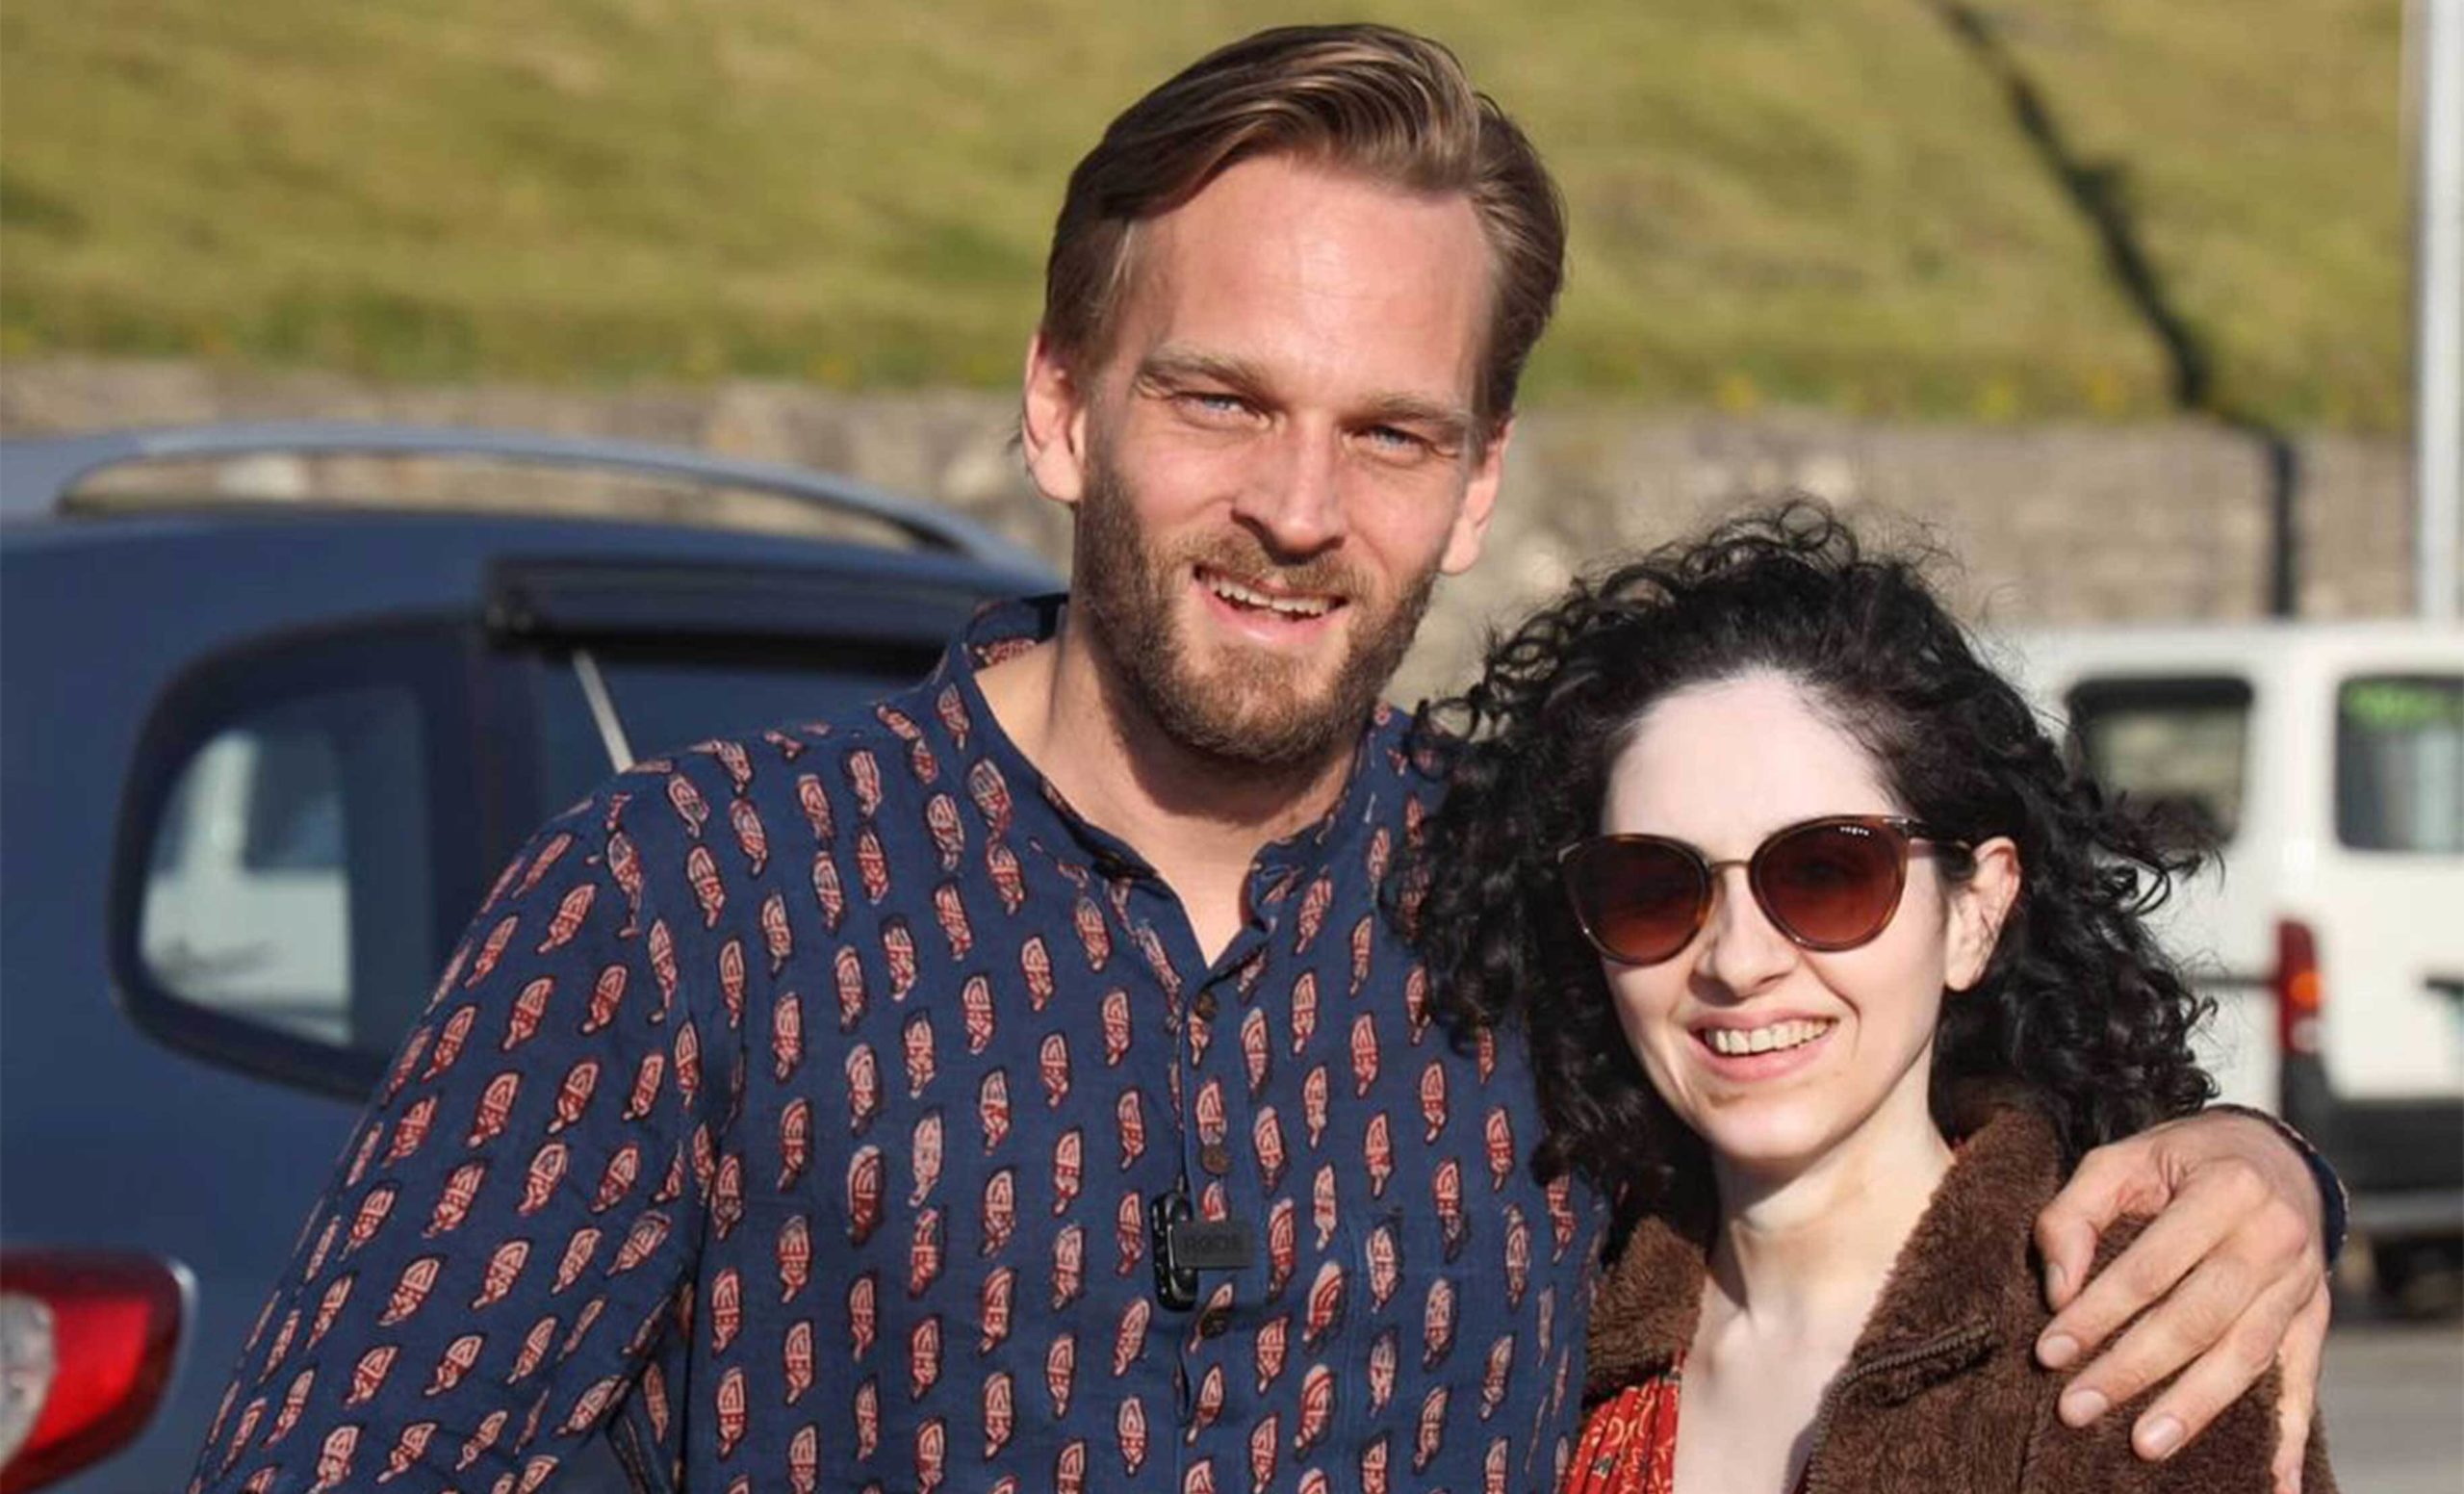 YouTuber Karl Rock, Restricted From Entering India, Reunites With His Wife After 397 Days